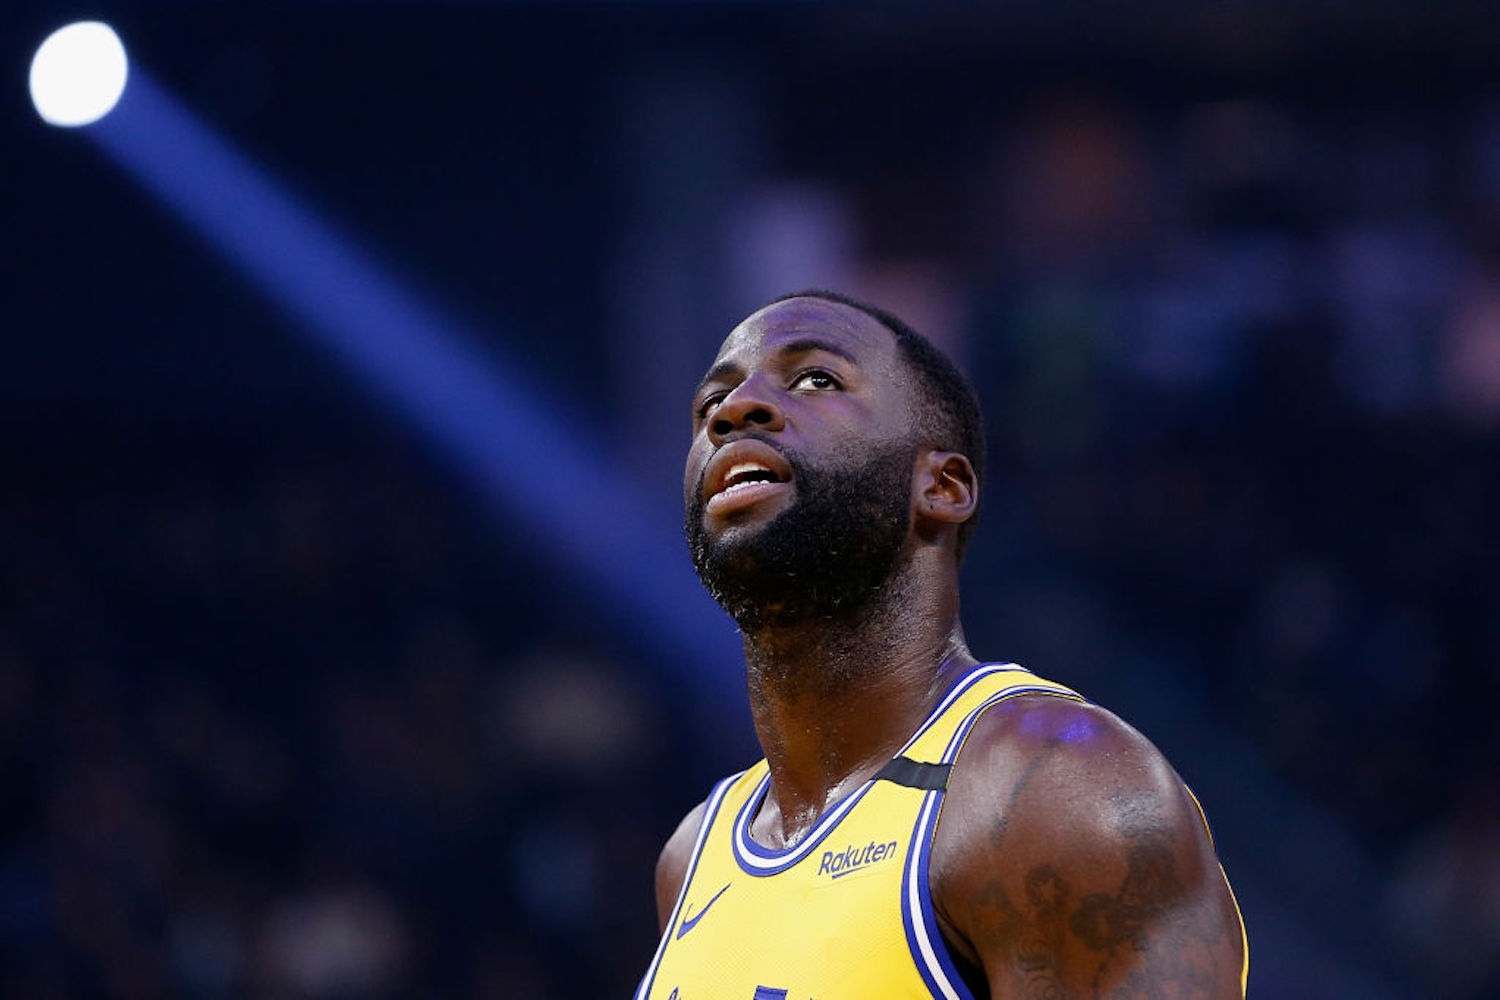 Draymond Green Sends a Passionate Message About ‘Shameful’ Washington, D.C. Protests